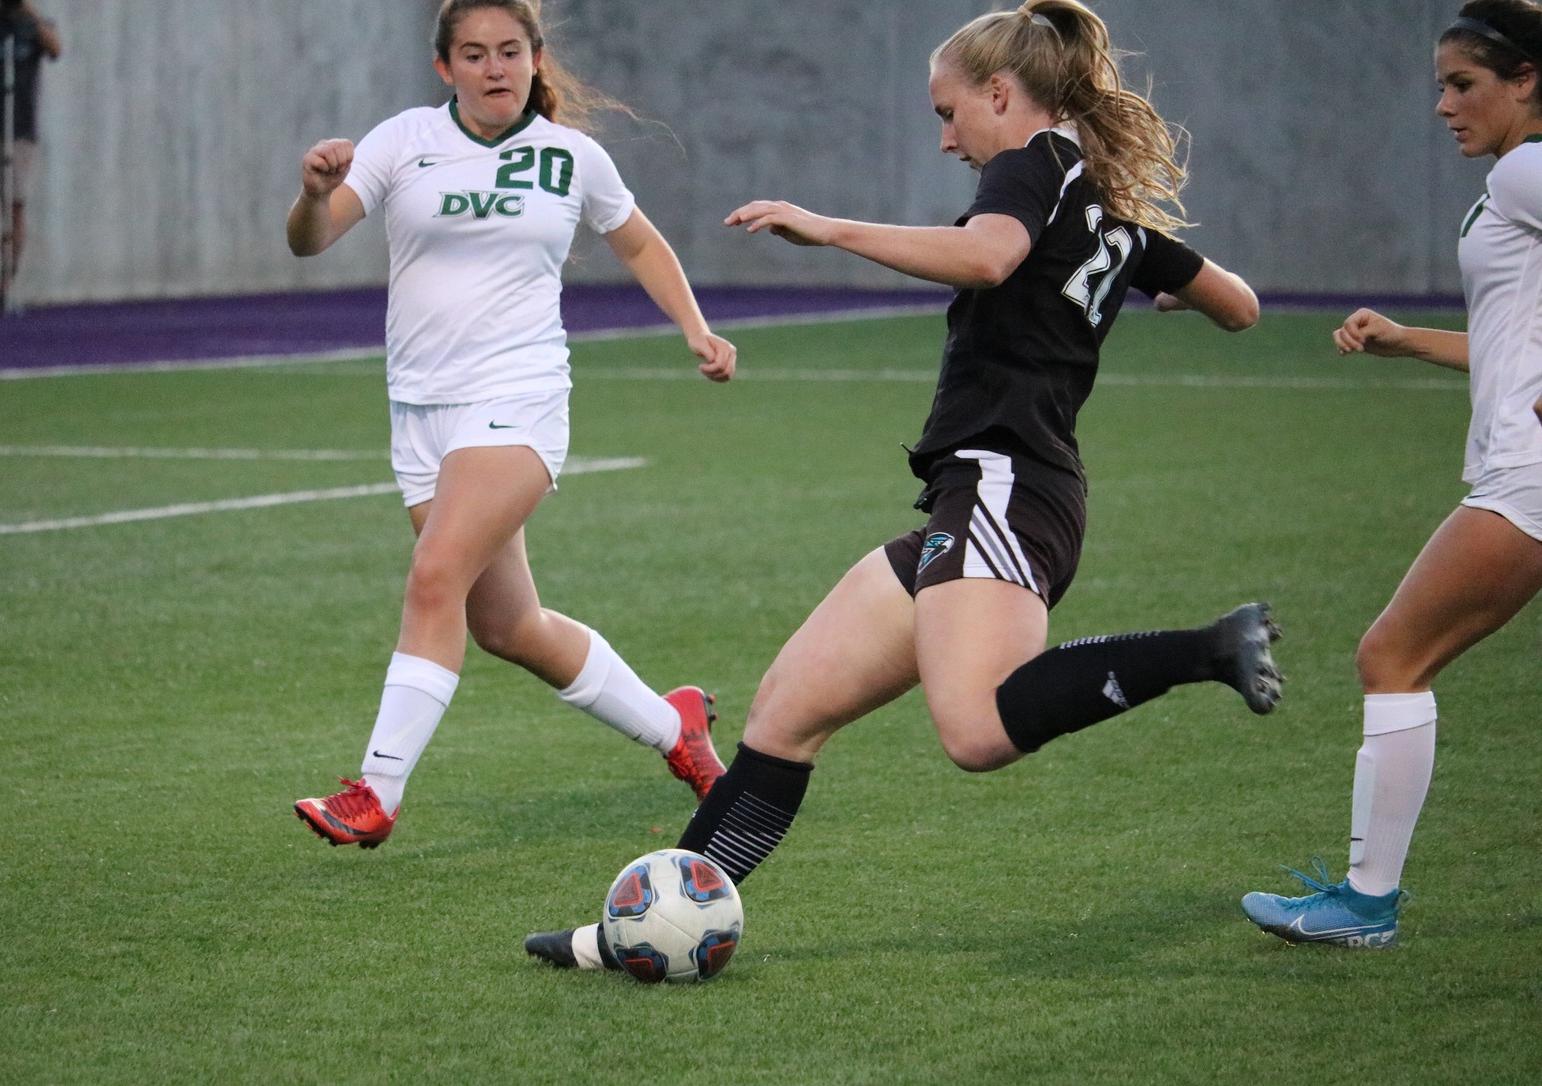 Clark's Hat Trick leads Falcons over DVC